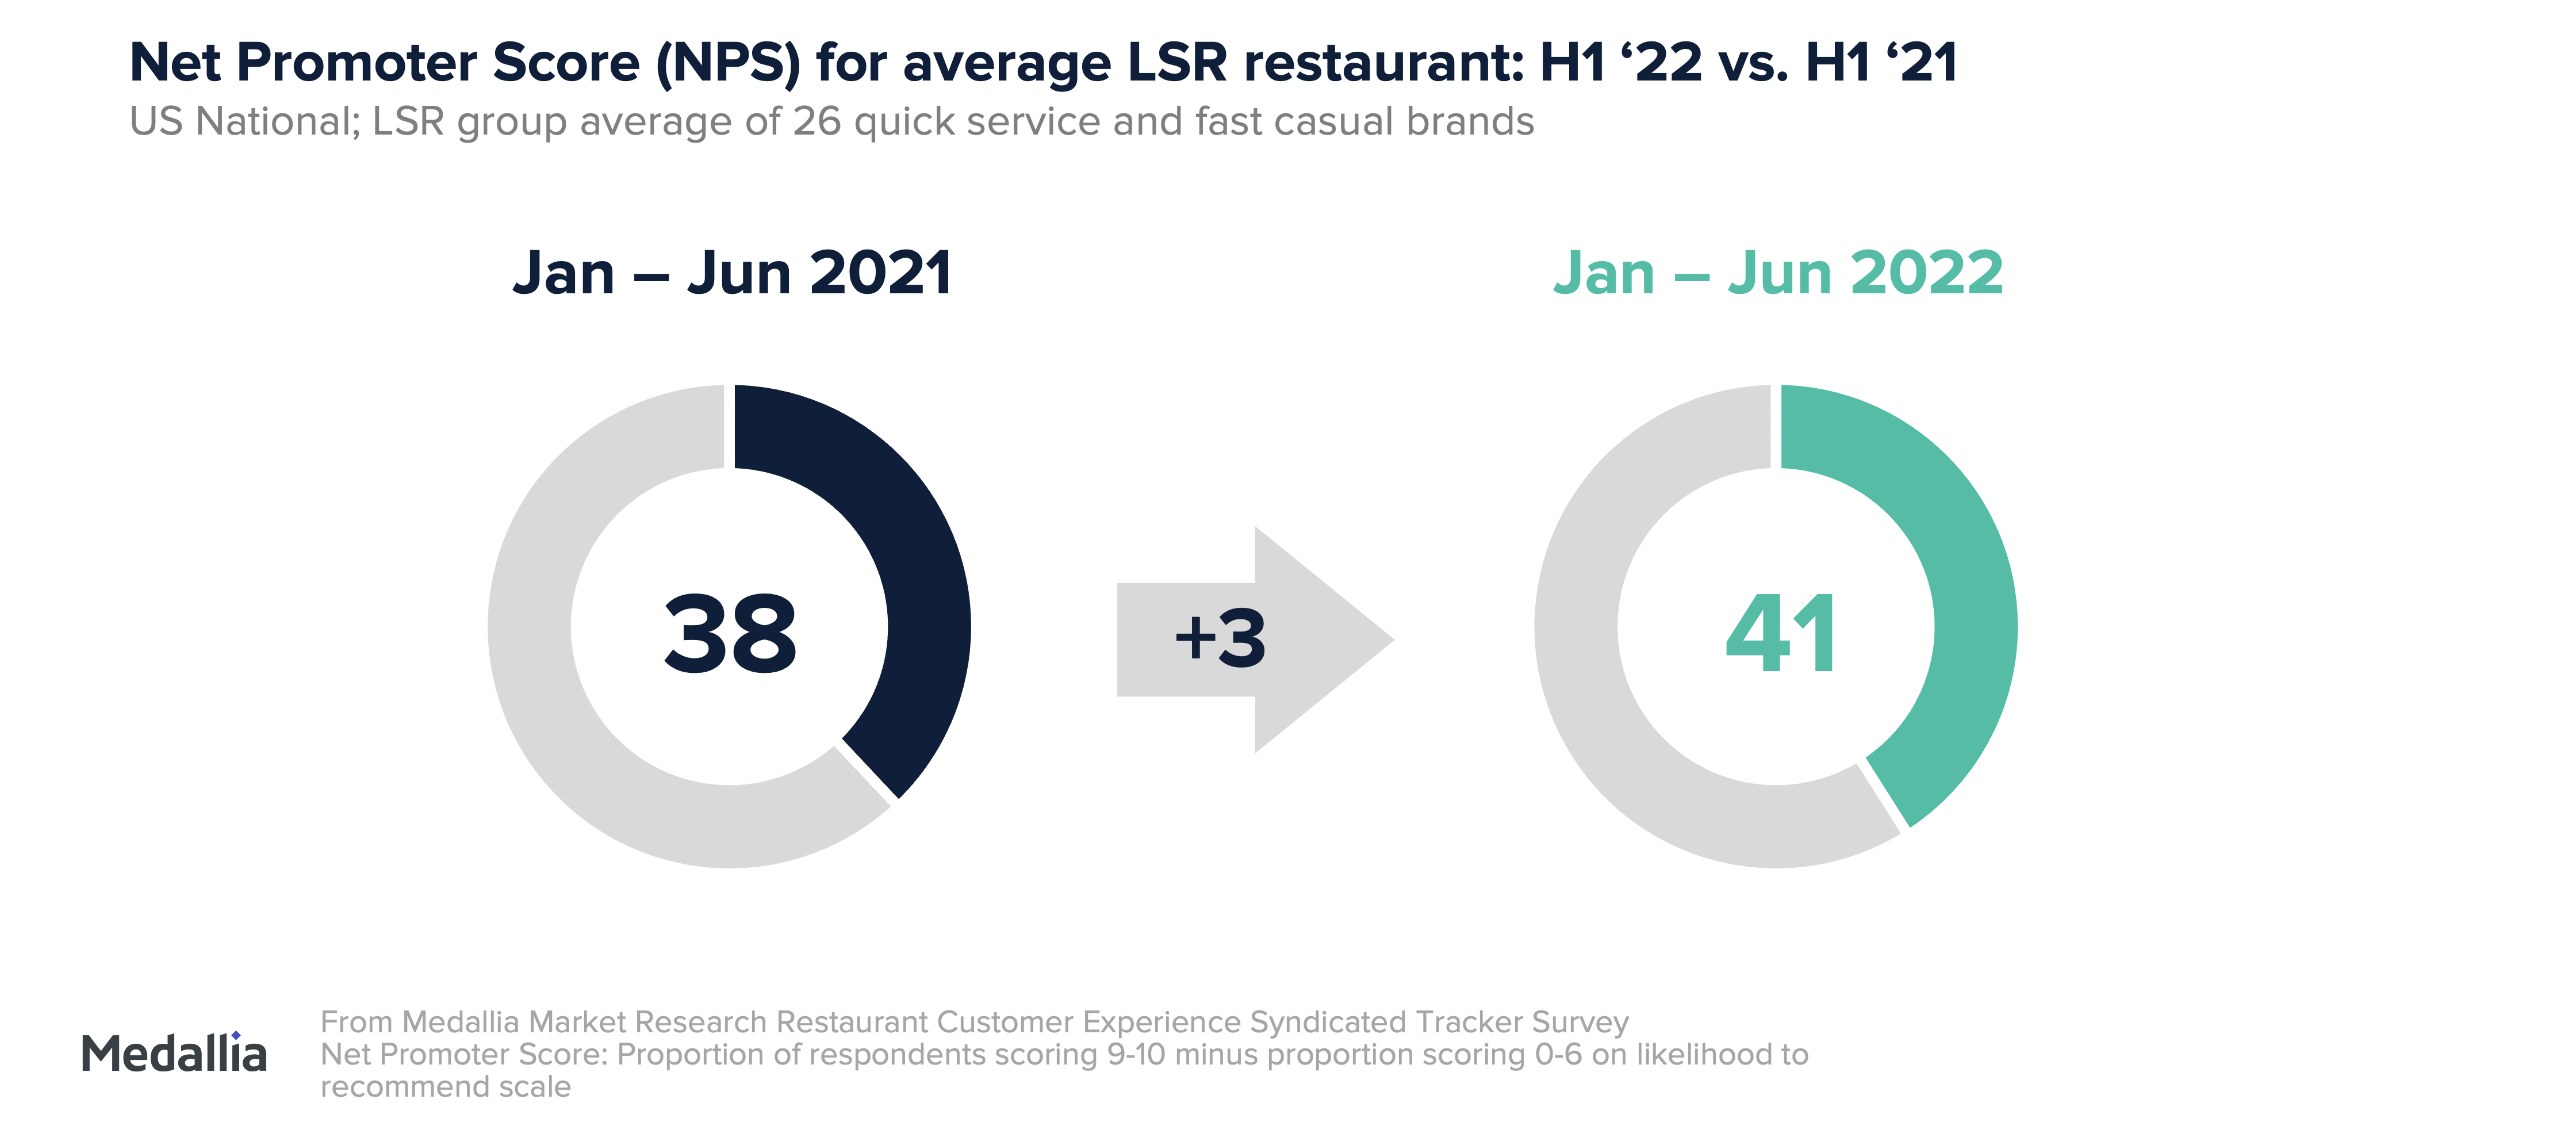 NPS for average LSR restaurant. NPS scores have risen from 38 to 41 from 2021 to 2022.